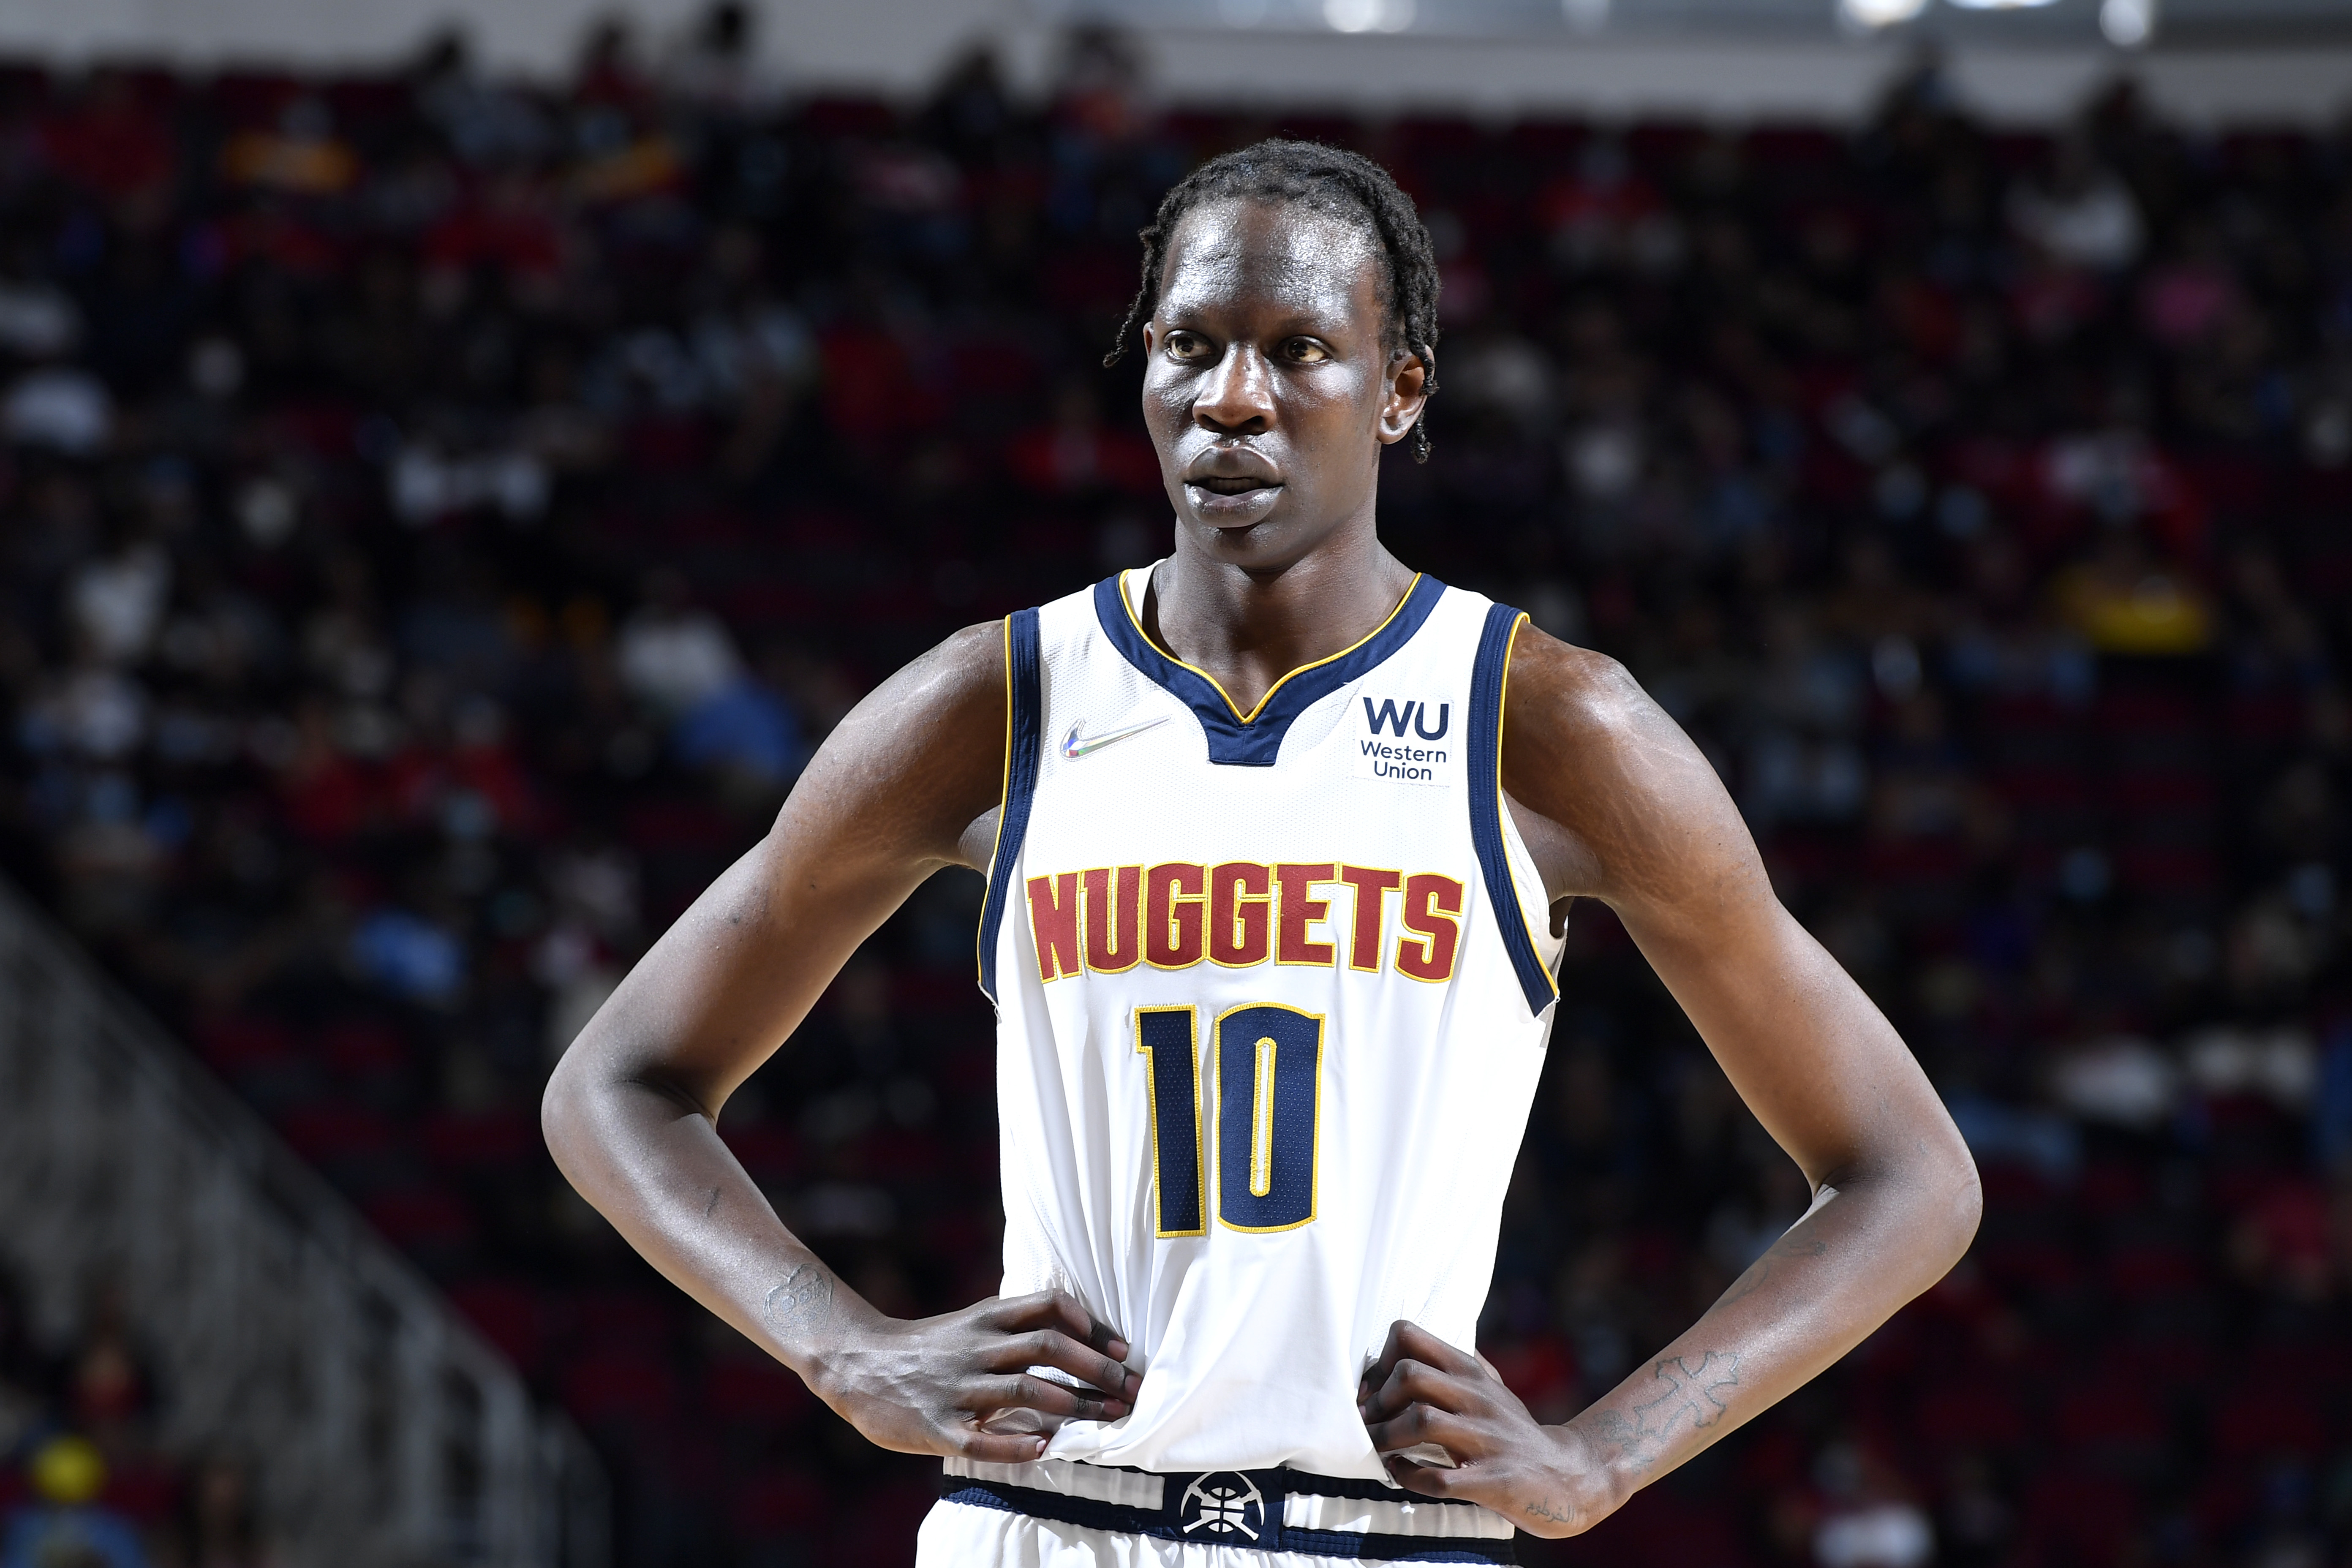 Report: Nuggets' Bol Bol to Have Foot Surgery, Miss 8-12 Weeks After Failed Trade